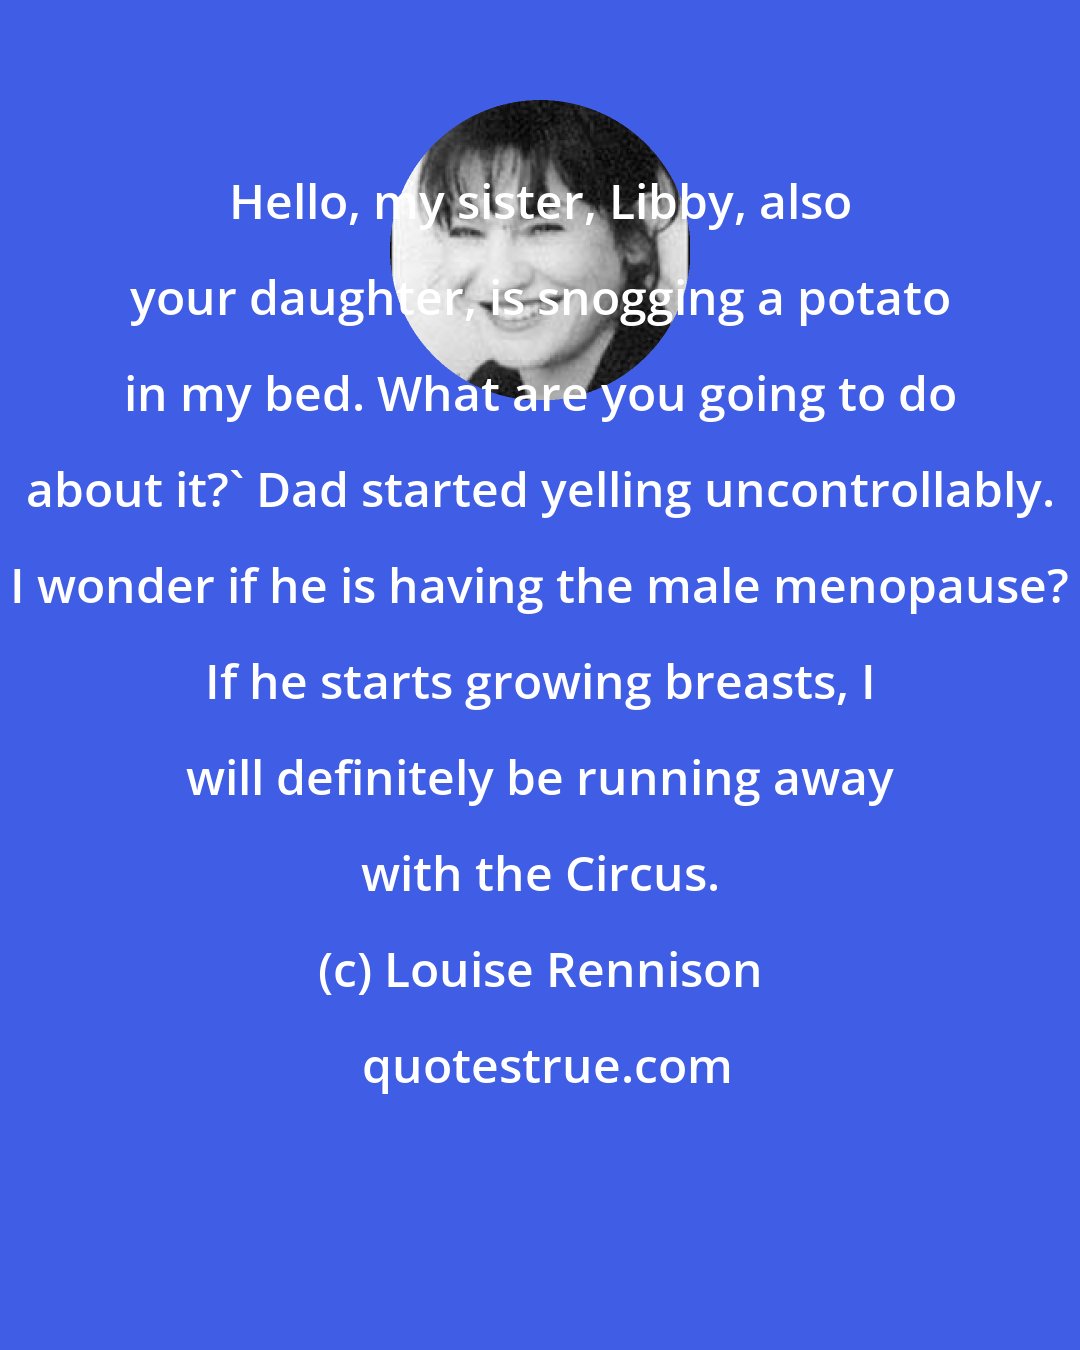 Louise Rennison: Hello, my sister, Libby, also your daughter, is snogging a potato in my bed. What are you going to do about it?' Dad started yelling uncontrollably. I wonder if he is having the male menopause? If he starts growing breasts, I will definitely be running away with the Circus.